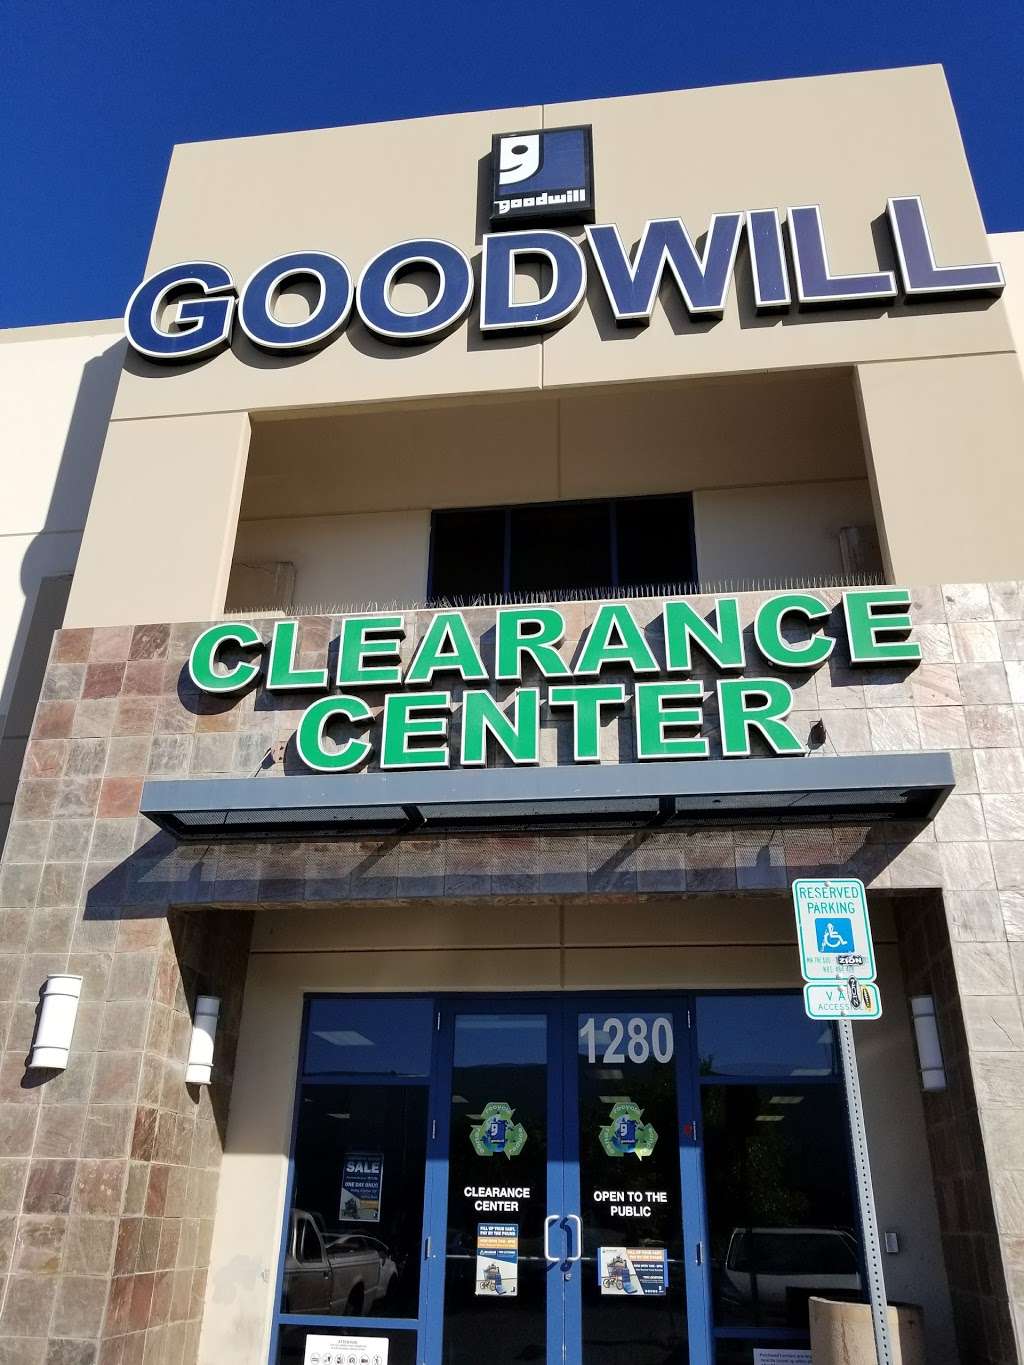 Goodwill Clearance Center and Donation Site | 1280 W Cheyenne Ave, North Las Vegas, NV 89030 | Phone: (702) 214-2008